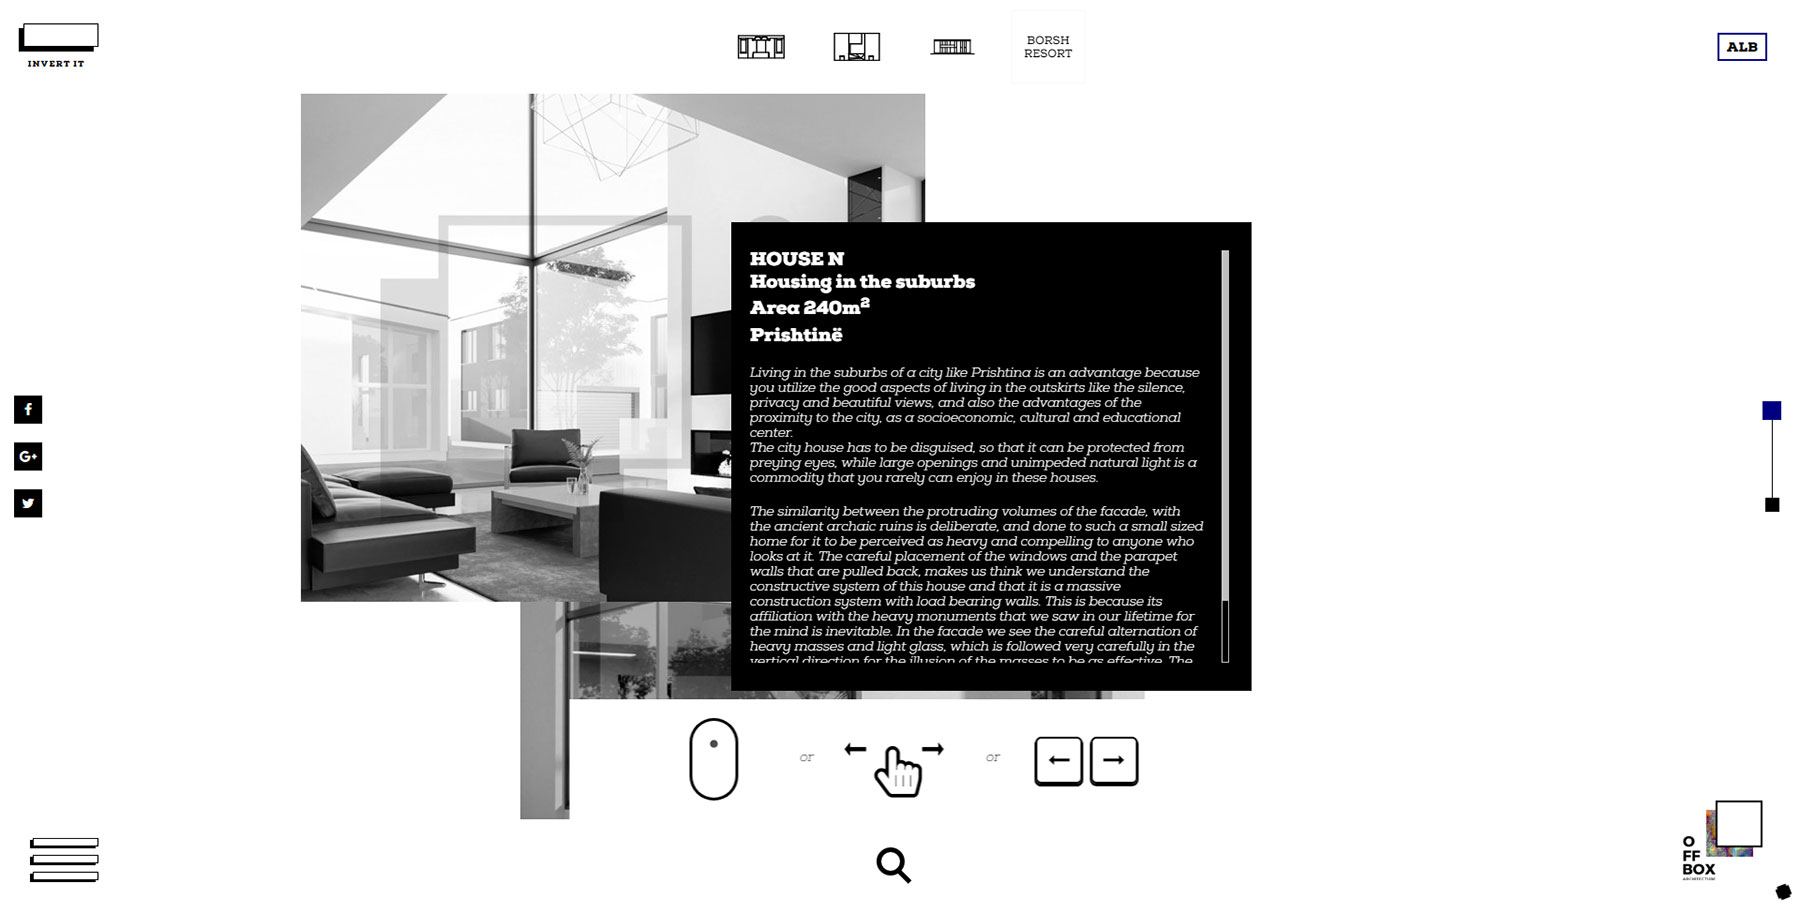 Offbox Architecture by creotive.co - Website of the Day